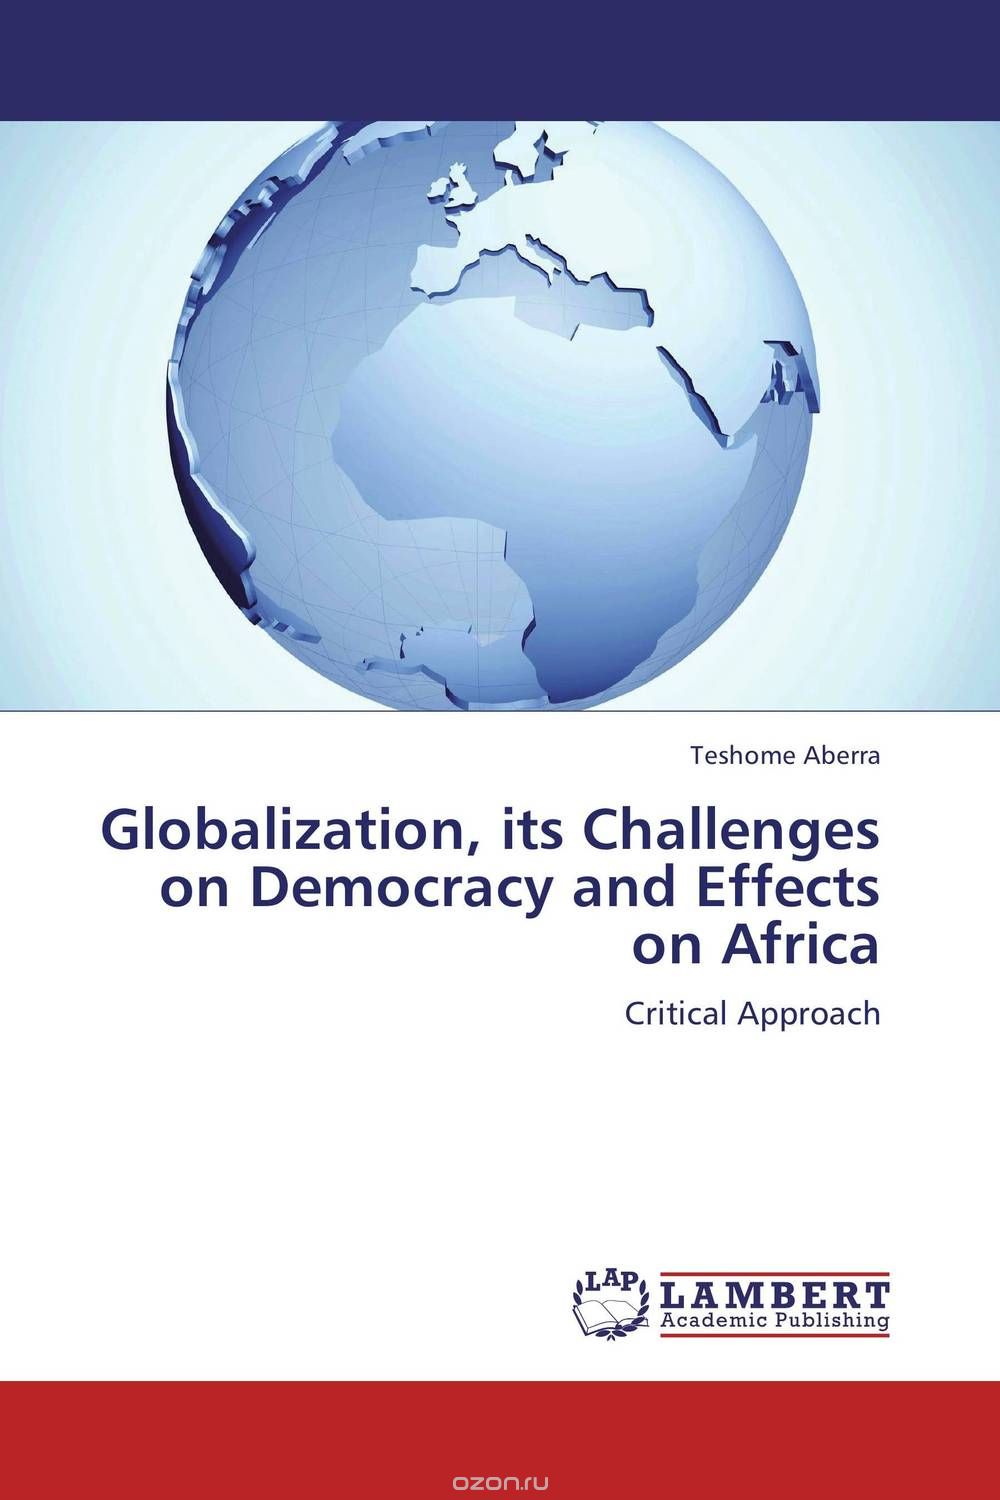 Скачать книгу "Globalization, its Challenges on Democracy and Effects on Africa"